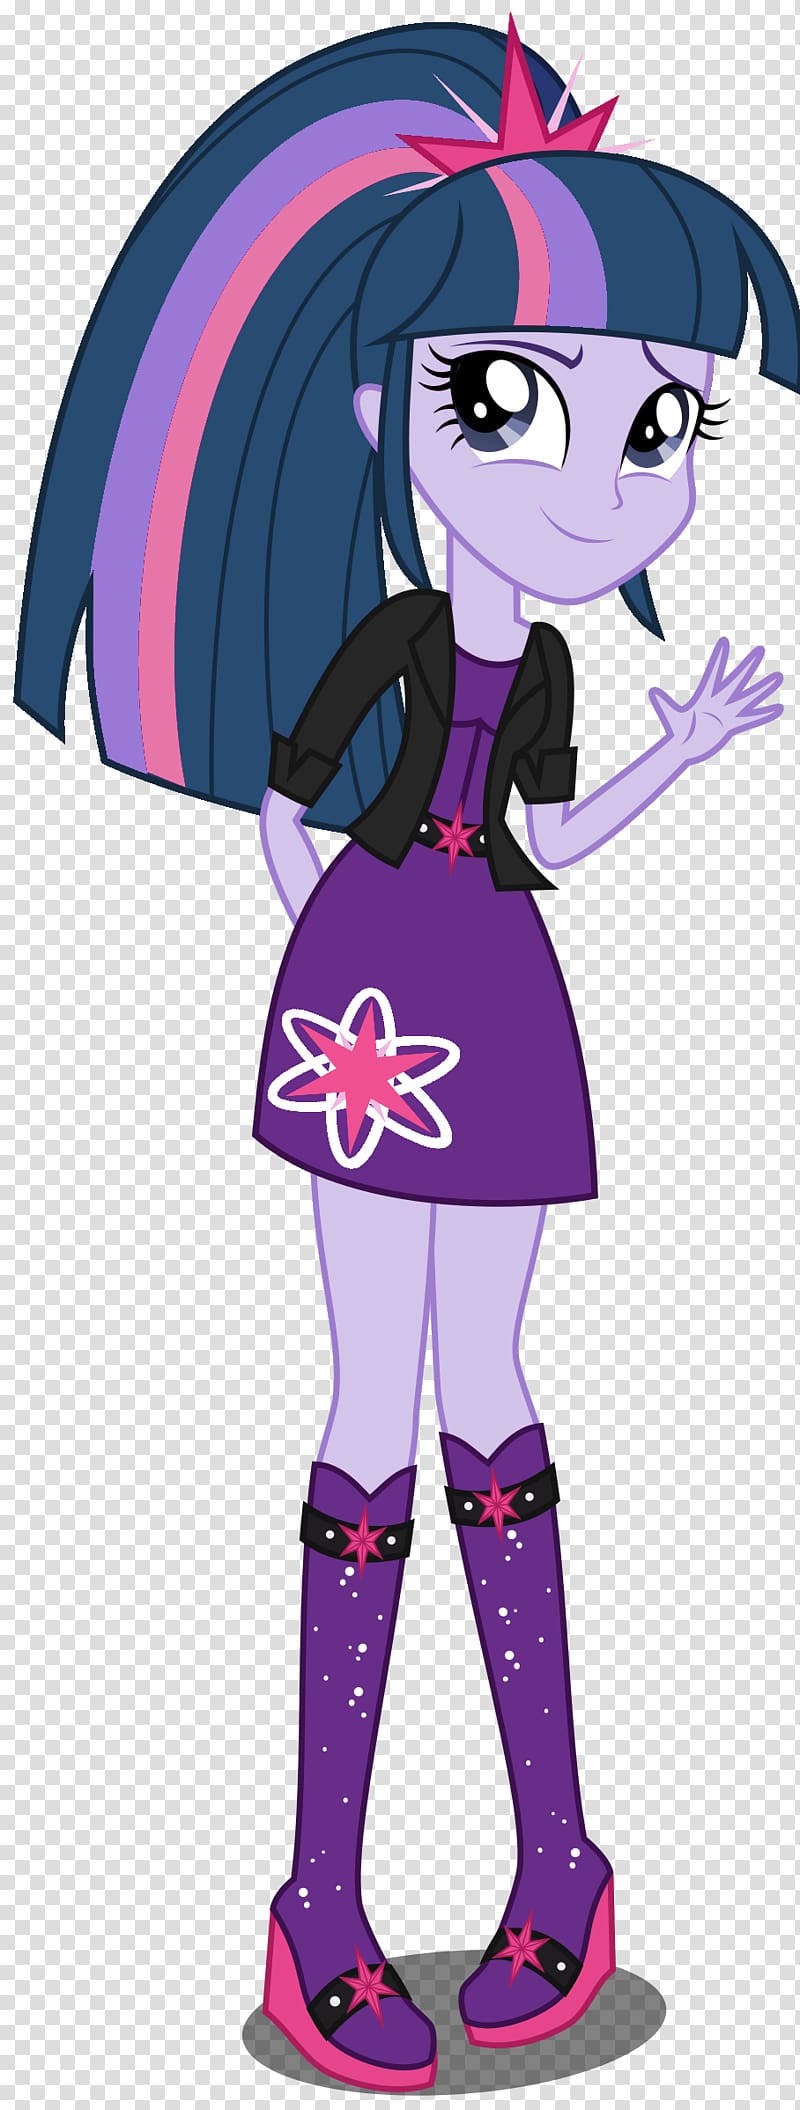 Twilight Sparkle Sunset Shimmer My Little Pony: Equestria Girls, colouring of unicorns transparent background PNG clipart